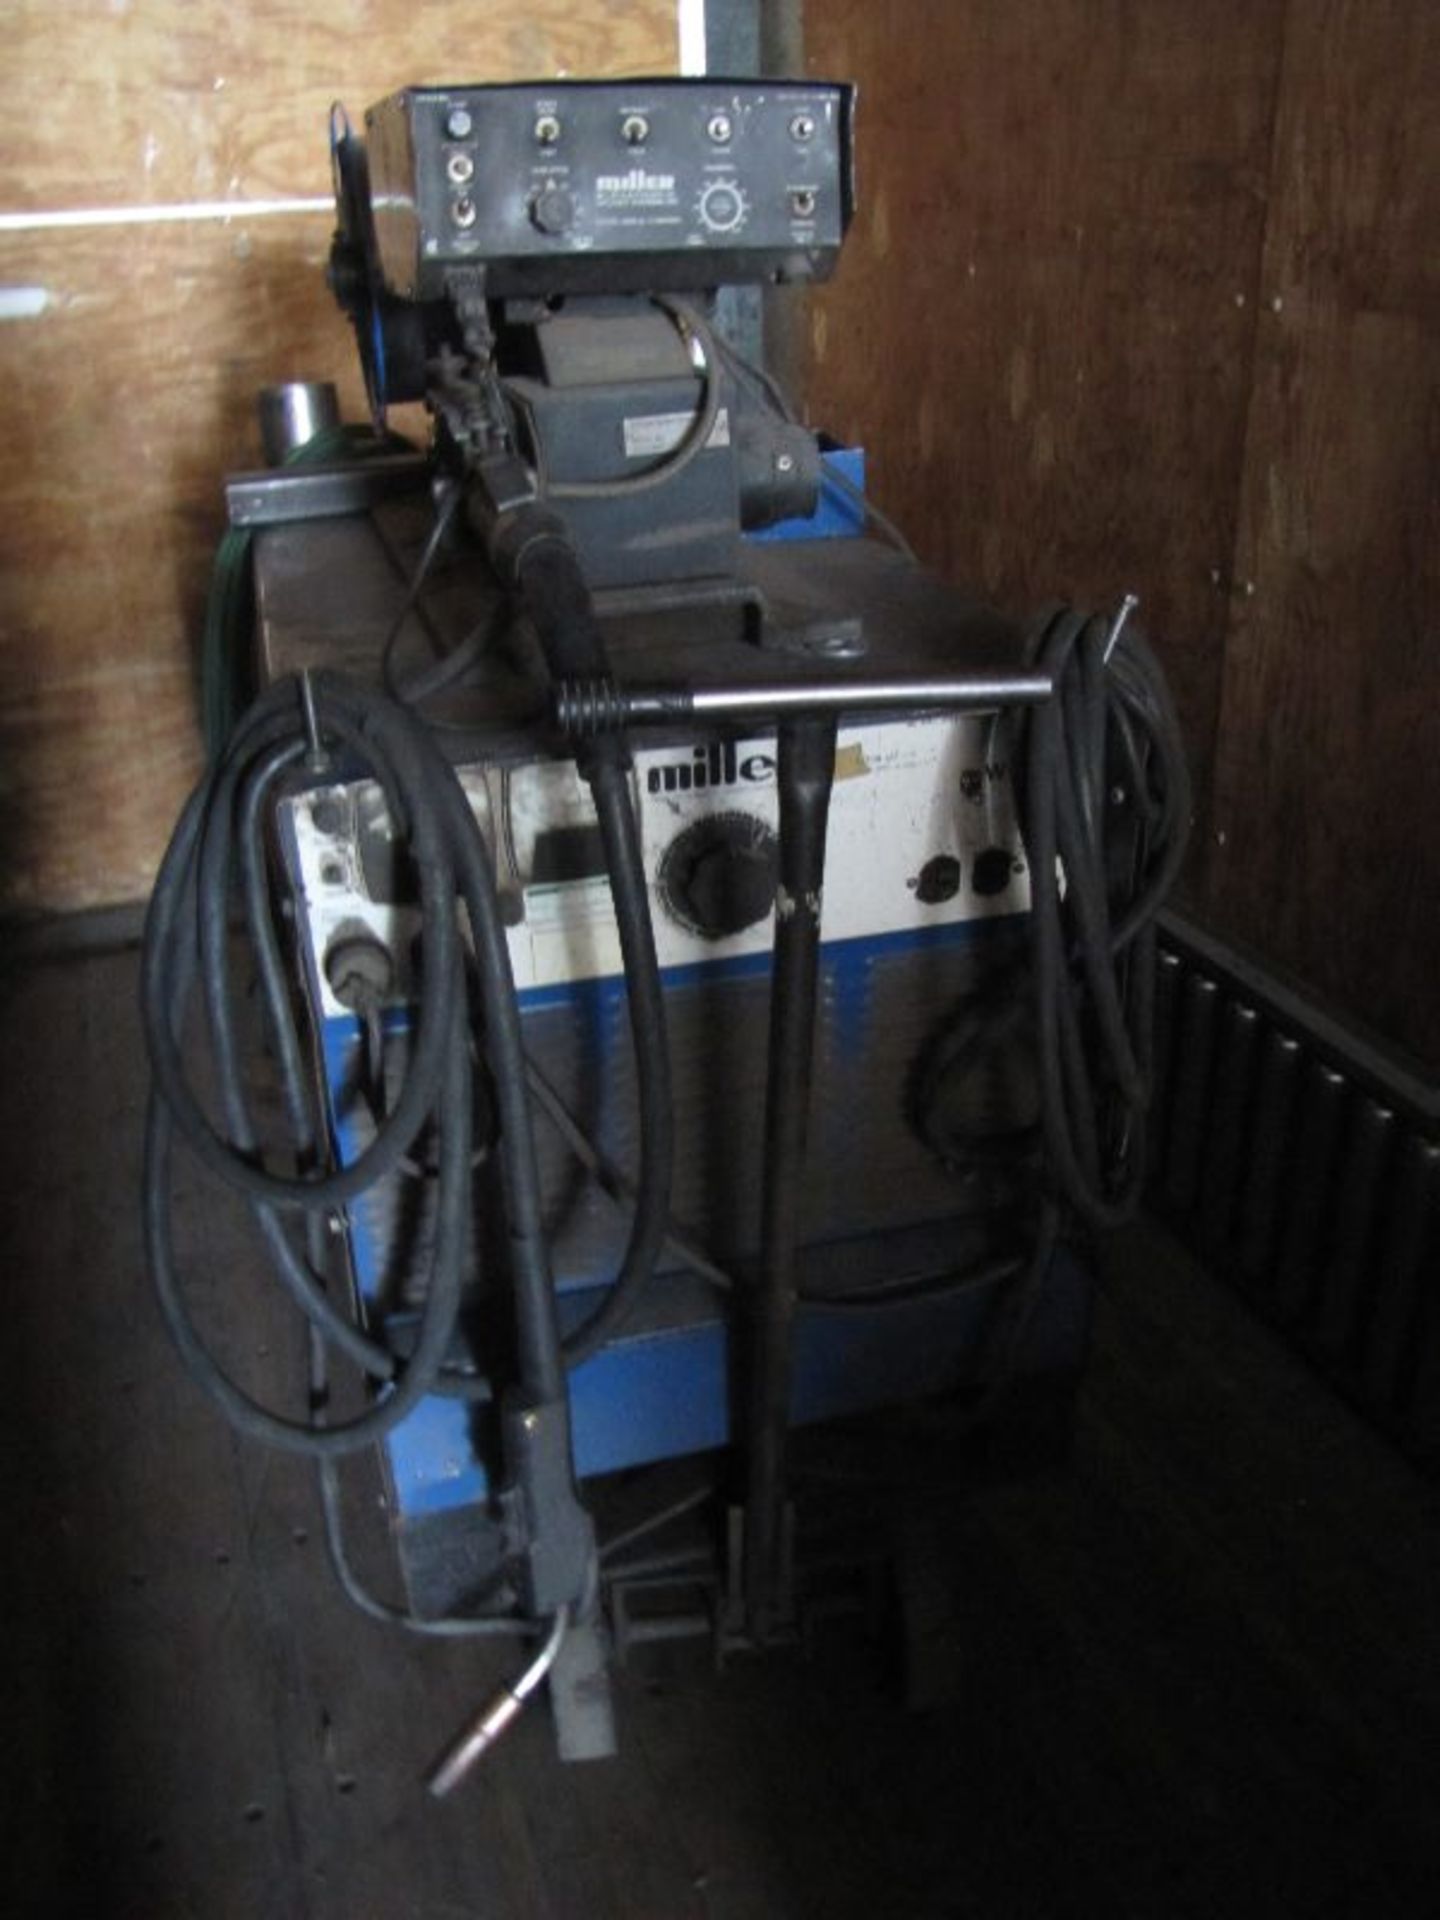 Miller Model MP-45E constant DC Welding Power Source, S/N: HJ200463, with Miller Matic S-54A Wire